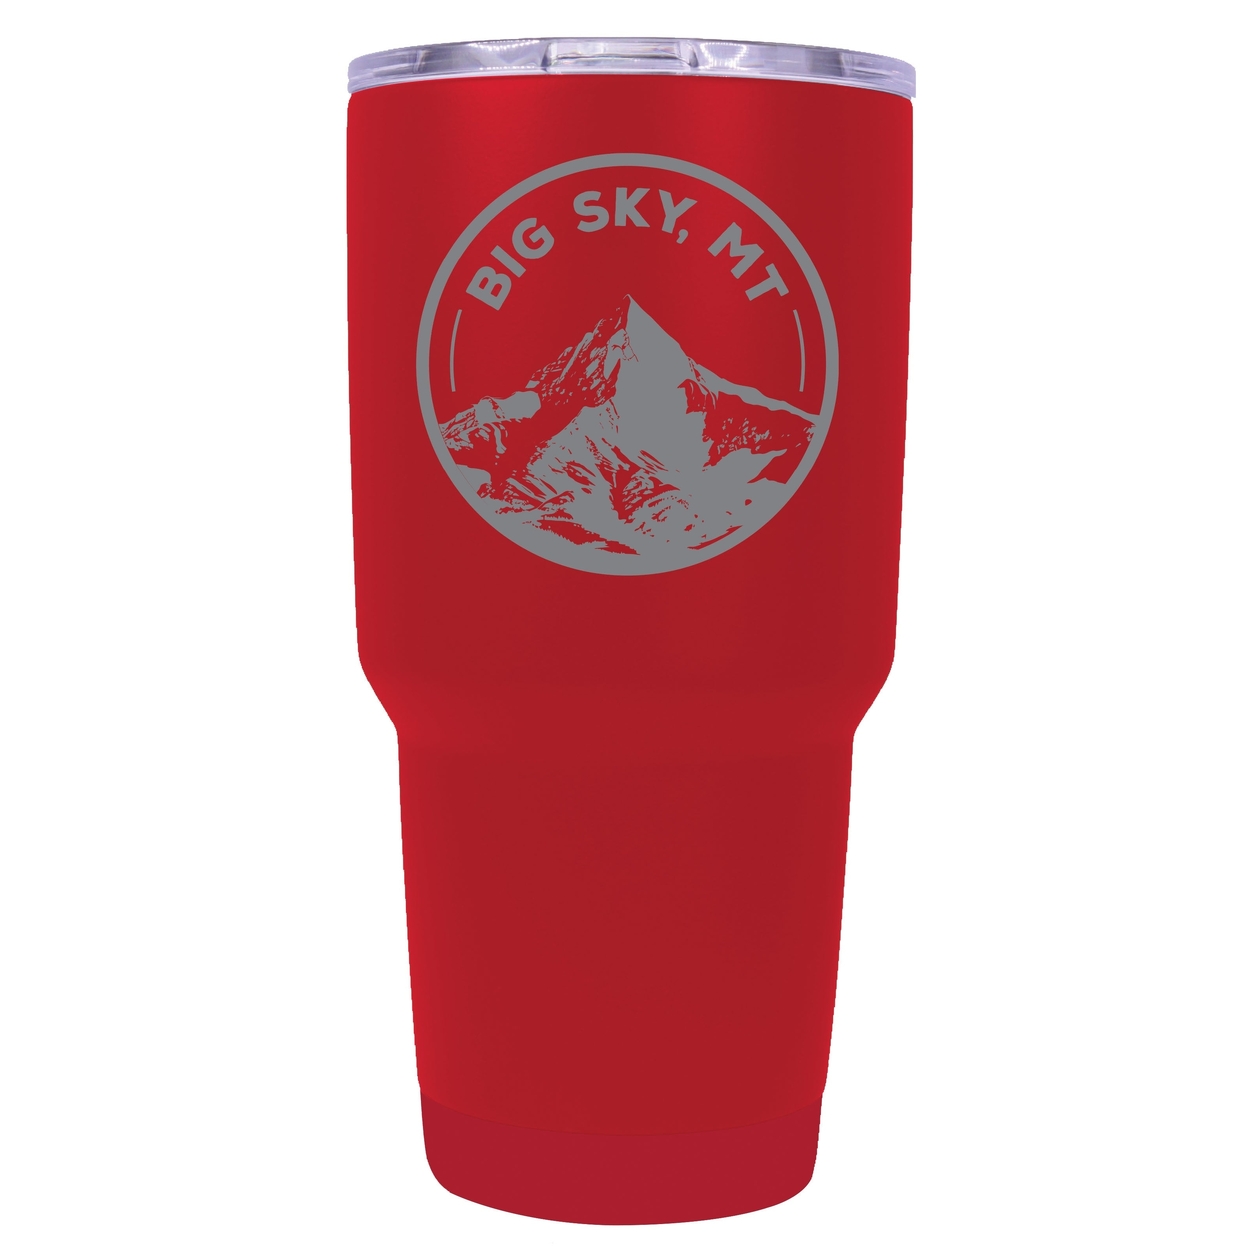 Big Sky Montana Souvenir 24 Oz Engraved Insulated Stainless Steel Tumbler - Seafoam,,2-Pack